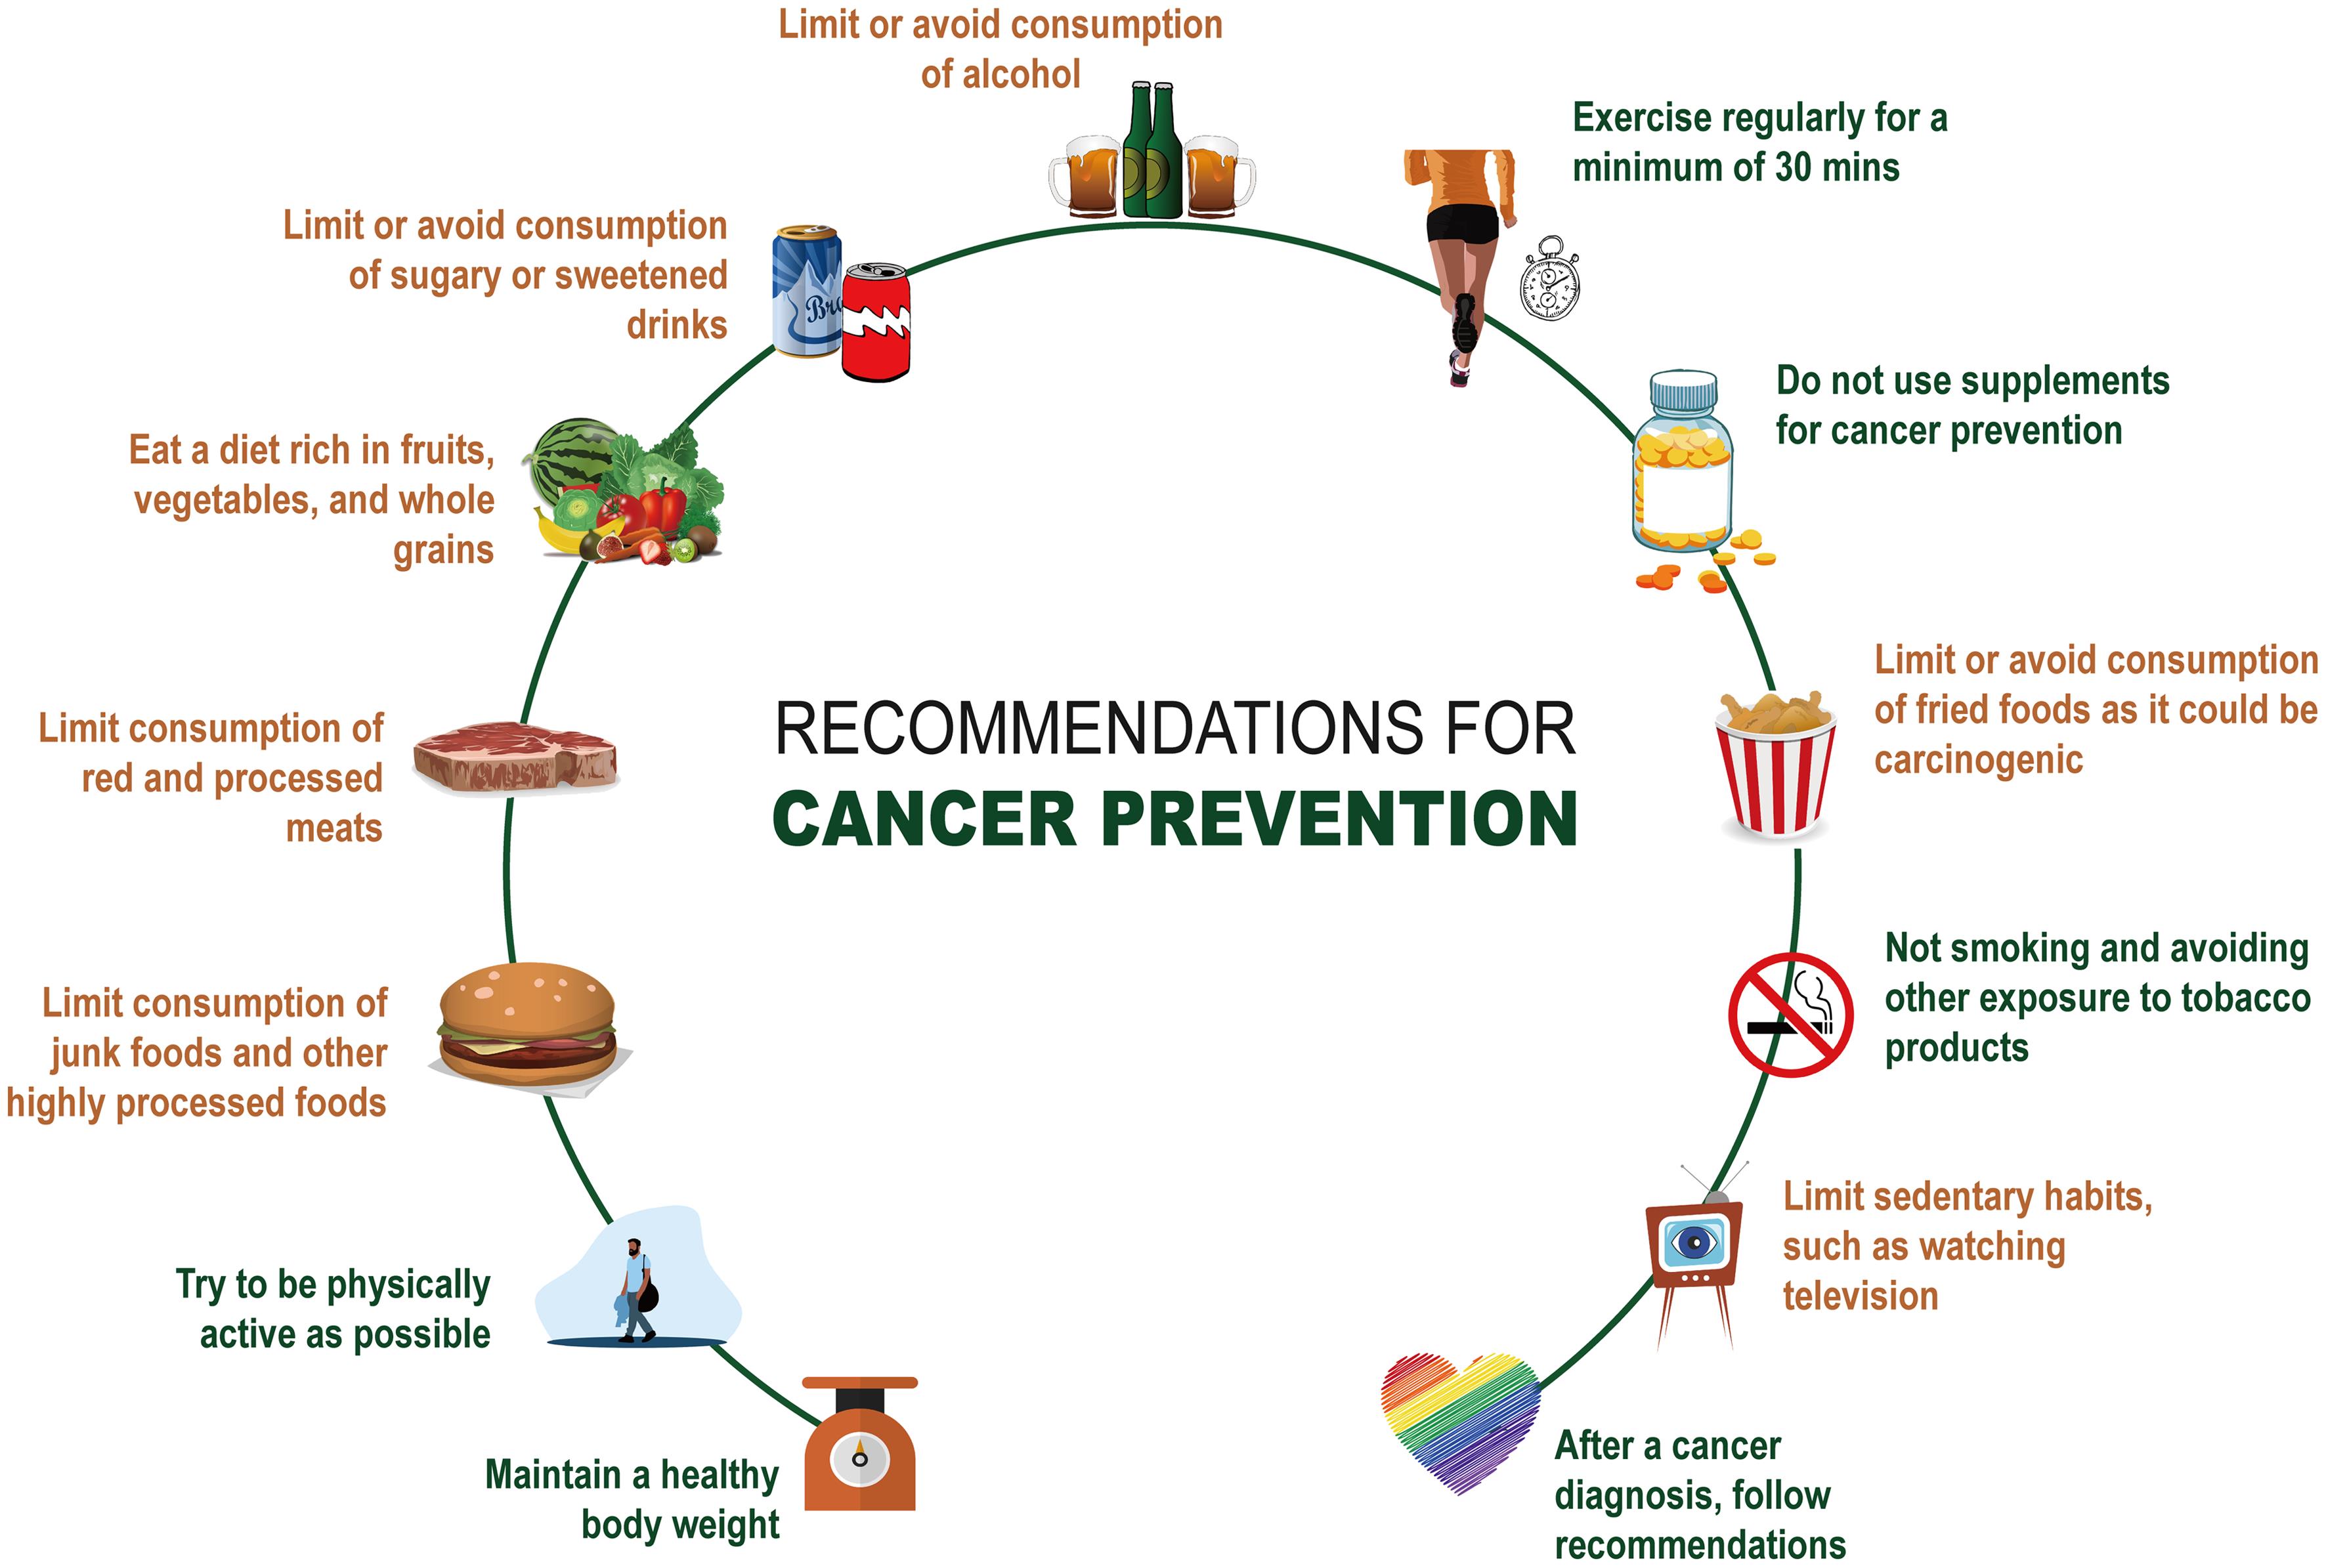 Recommendations for cancer prevention.